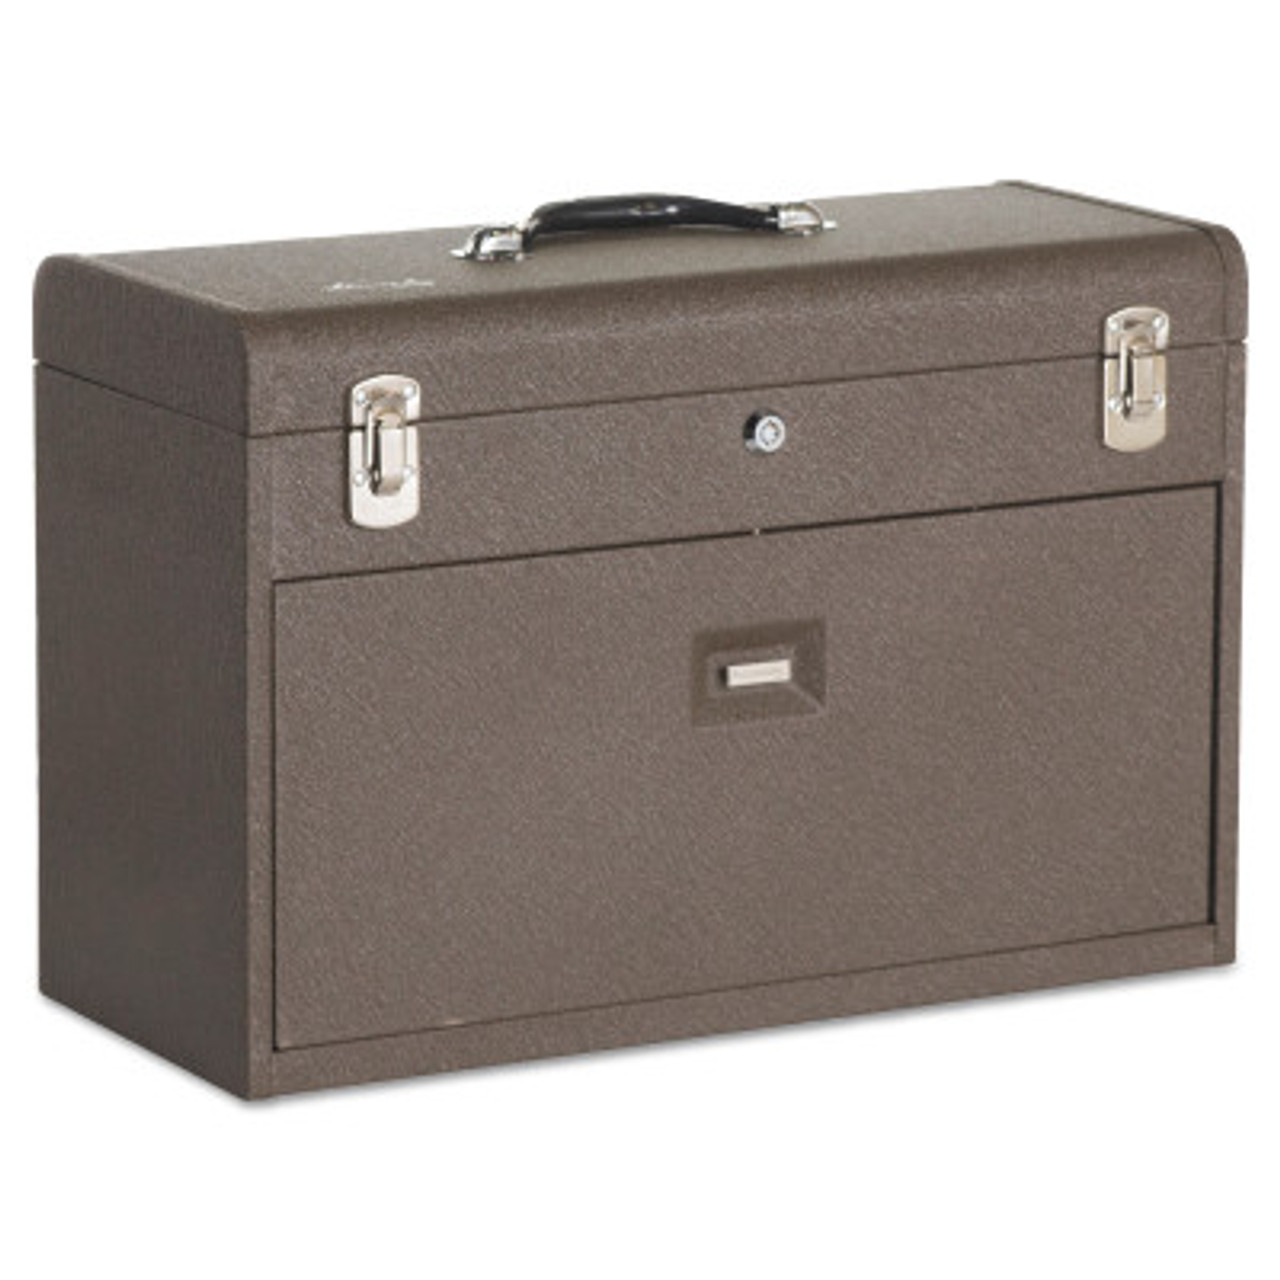 Kennedy 444-620B Machinists Chest 3-Drawer Brown